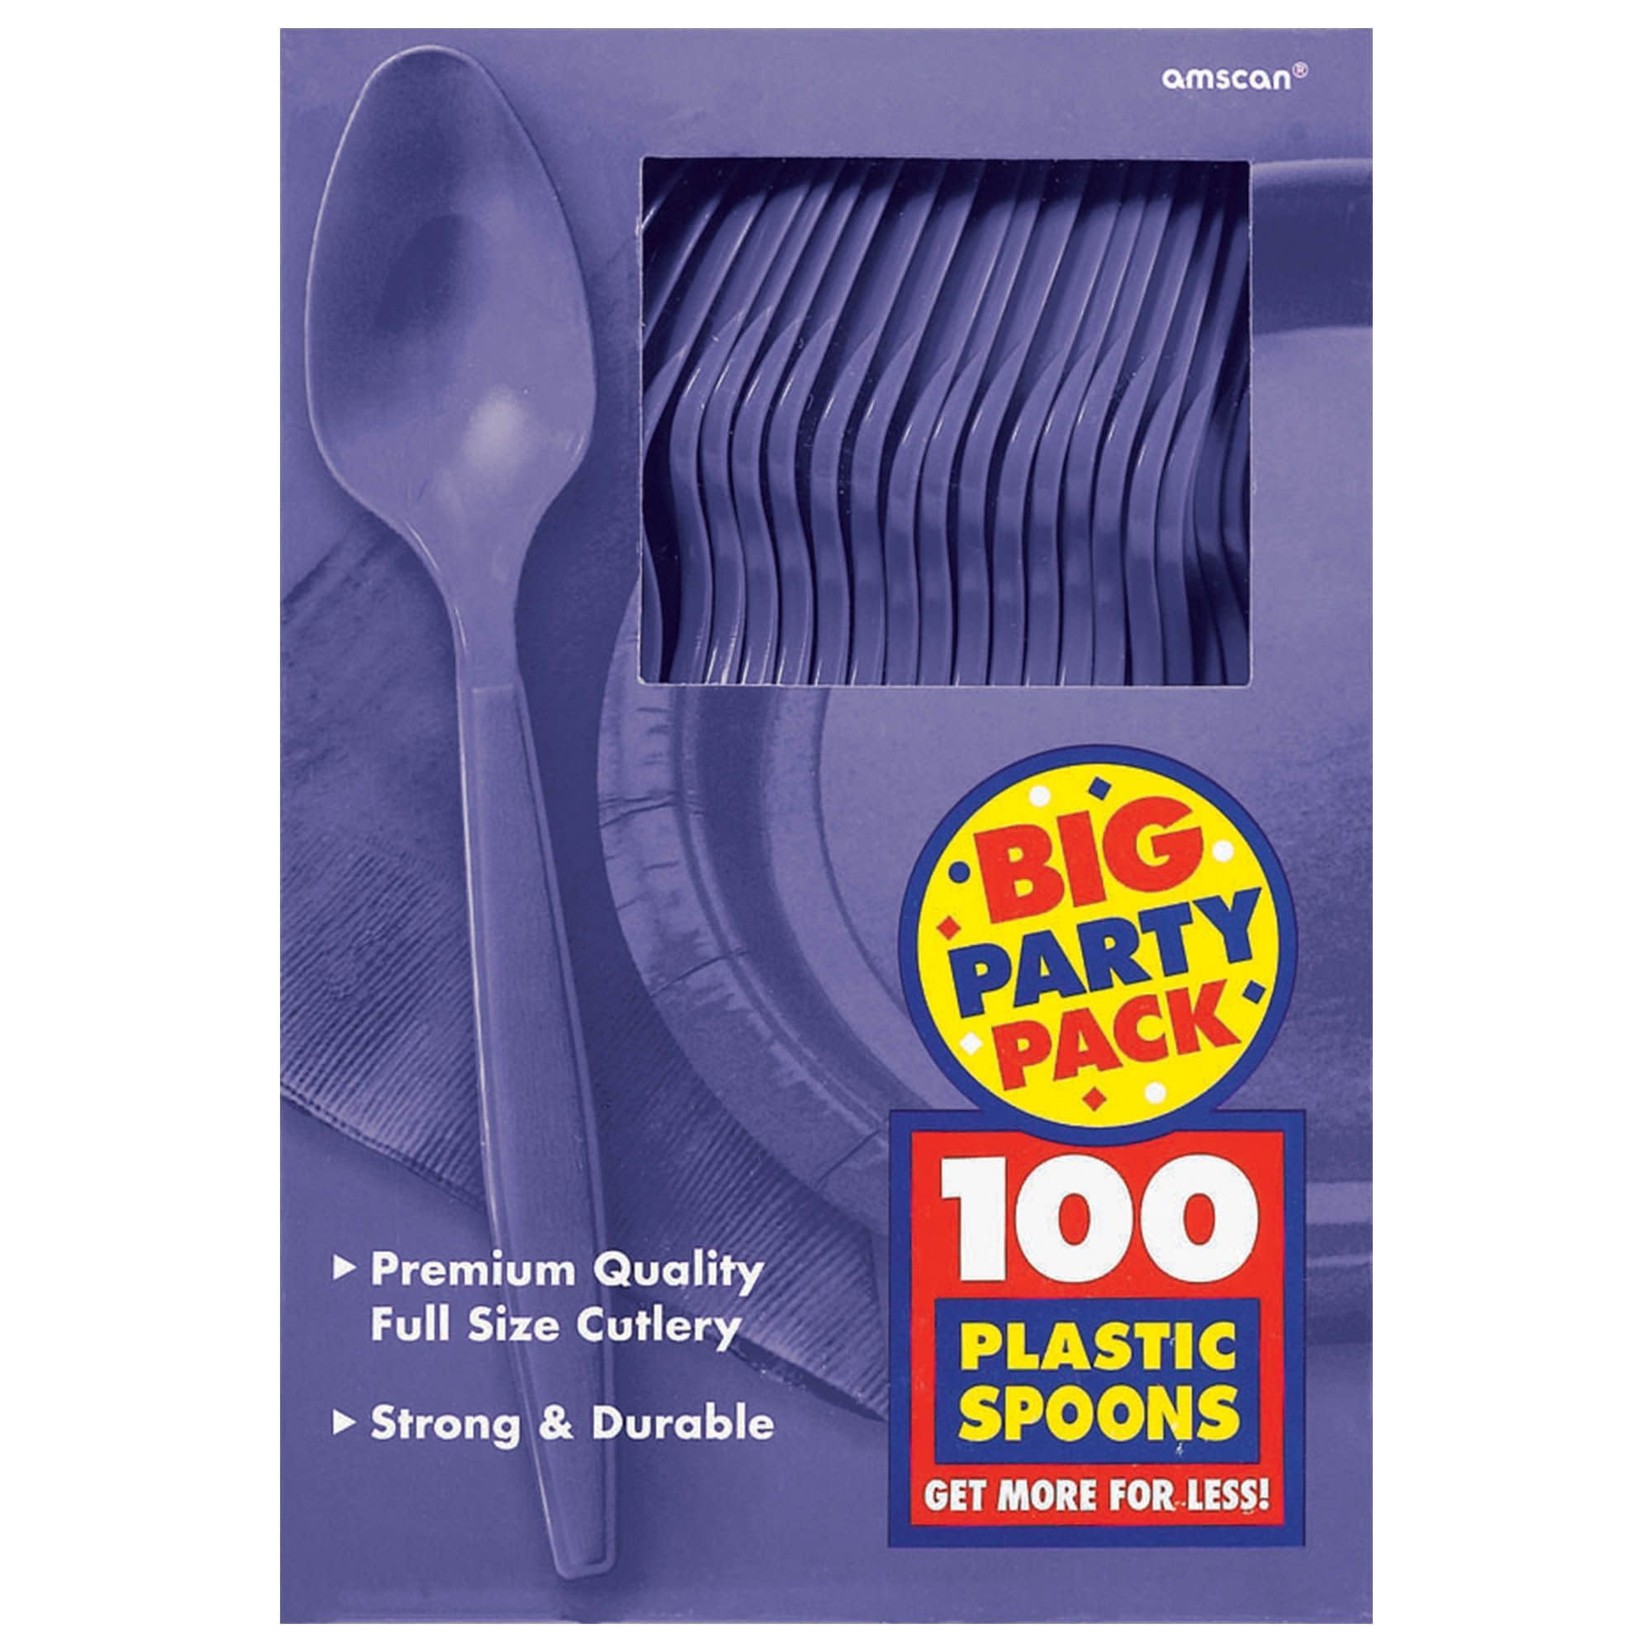 Big Party Pack Plastic Spoons - New Purple